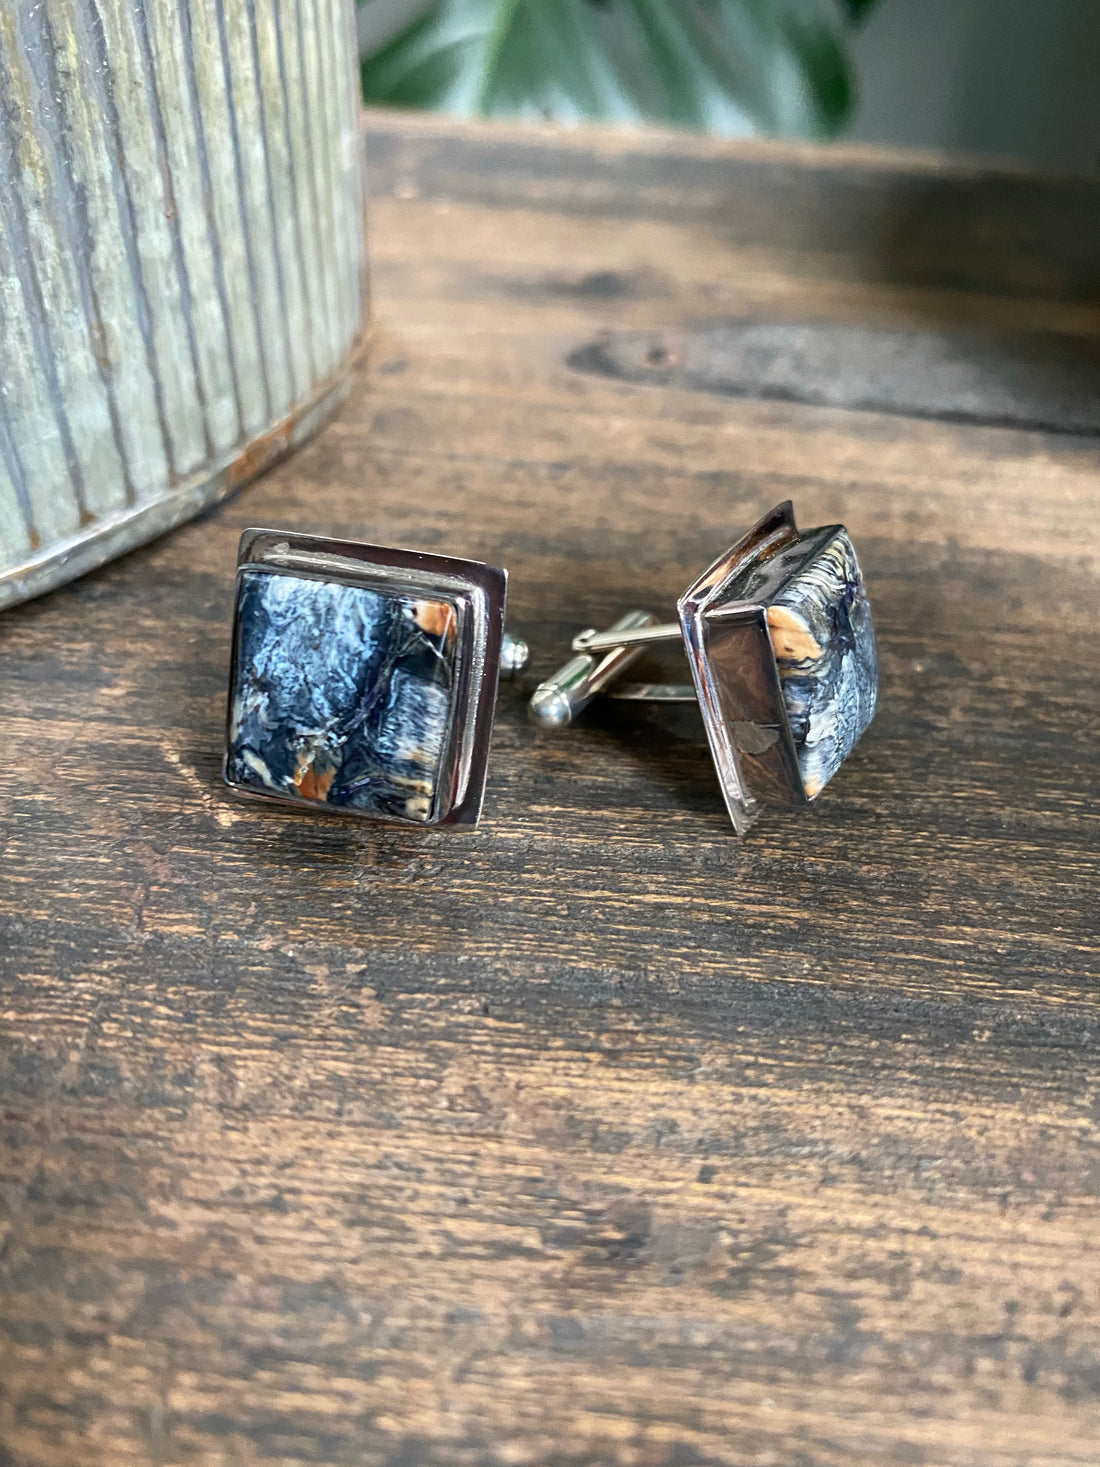 Domed Mammoth Tooth Square Cufflinks